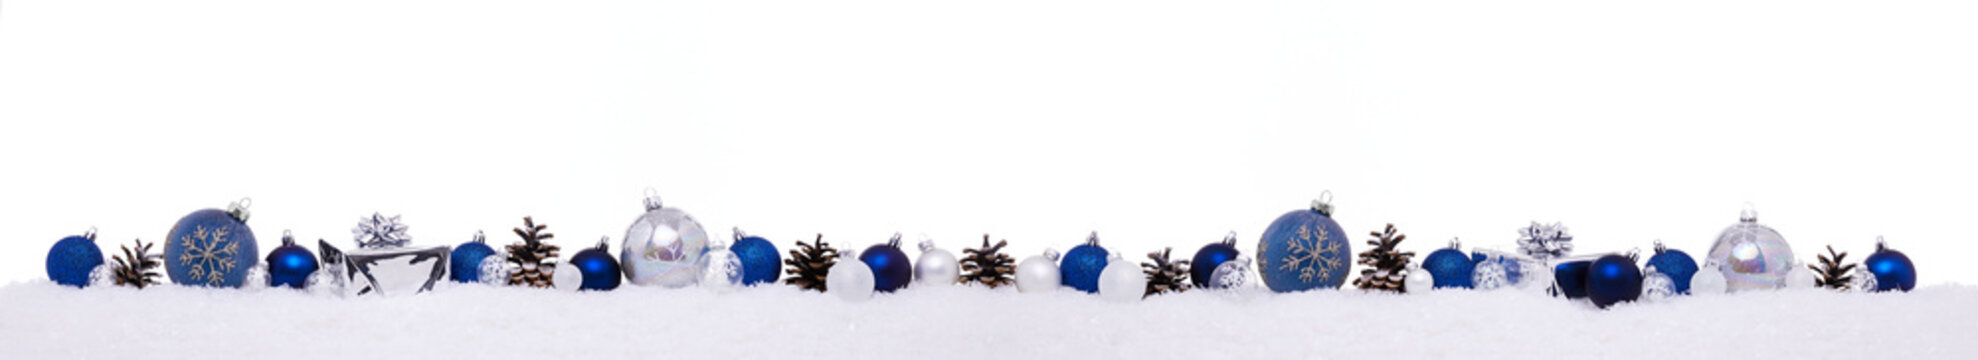 Blue christmas balls with xmas present gift boxes in a row isolated on snow, Christmas banner